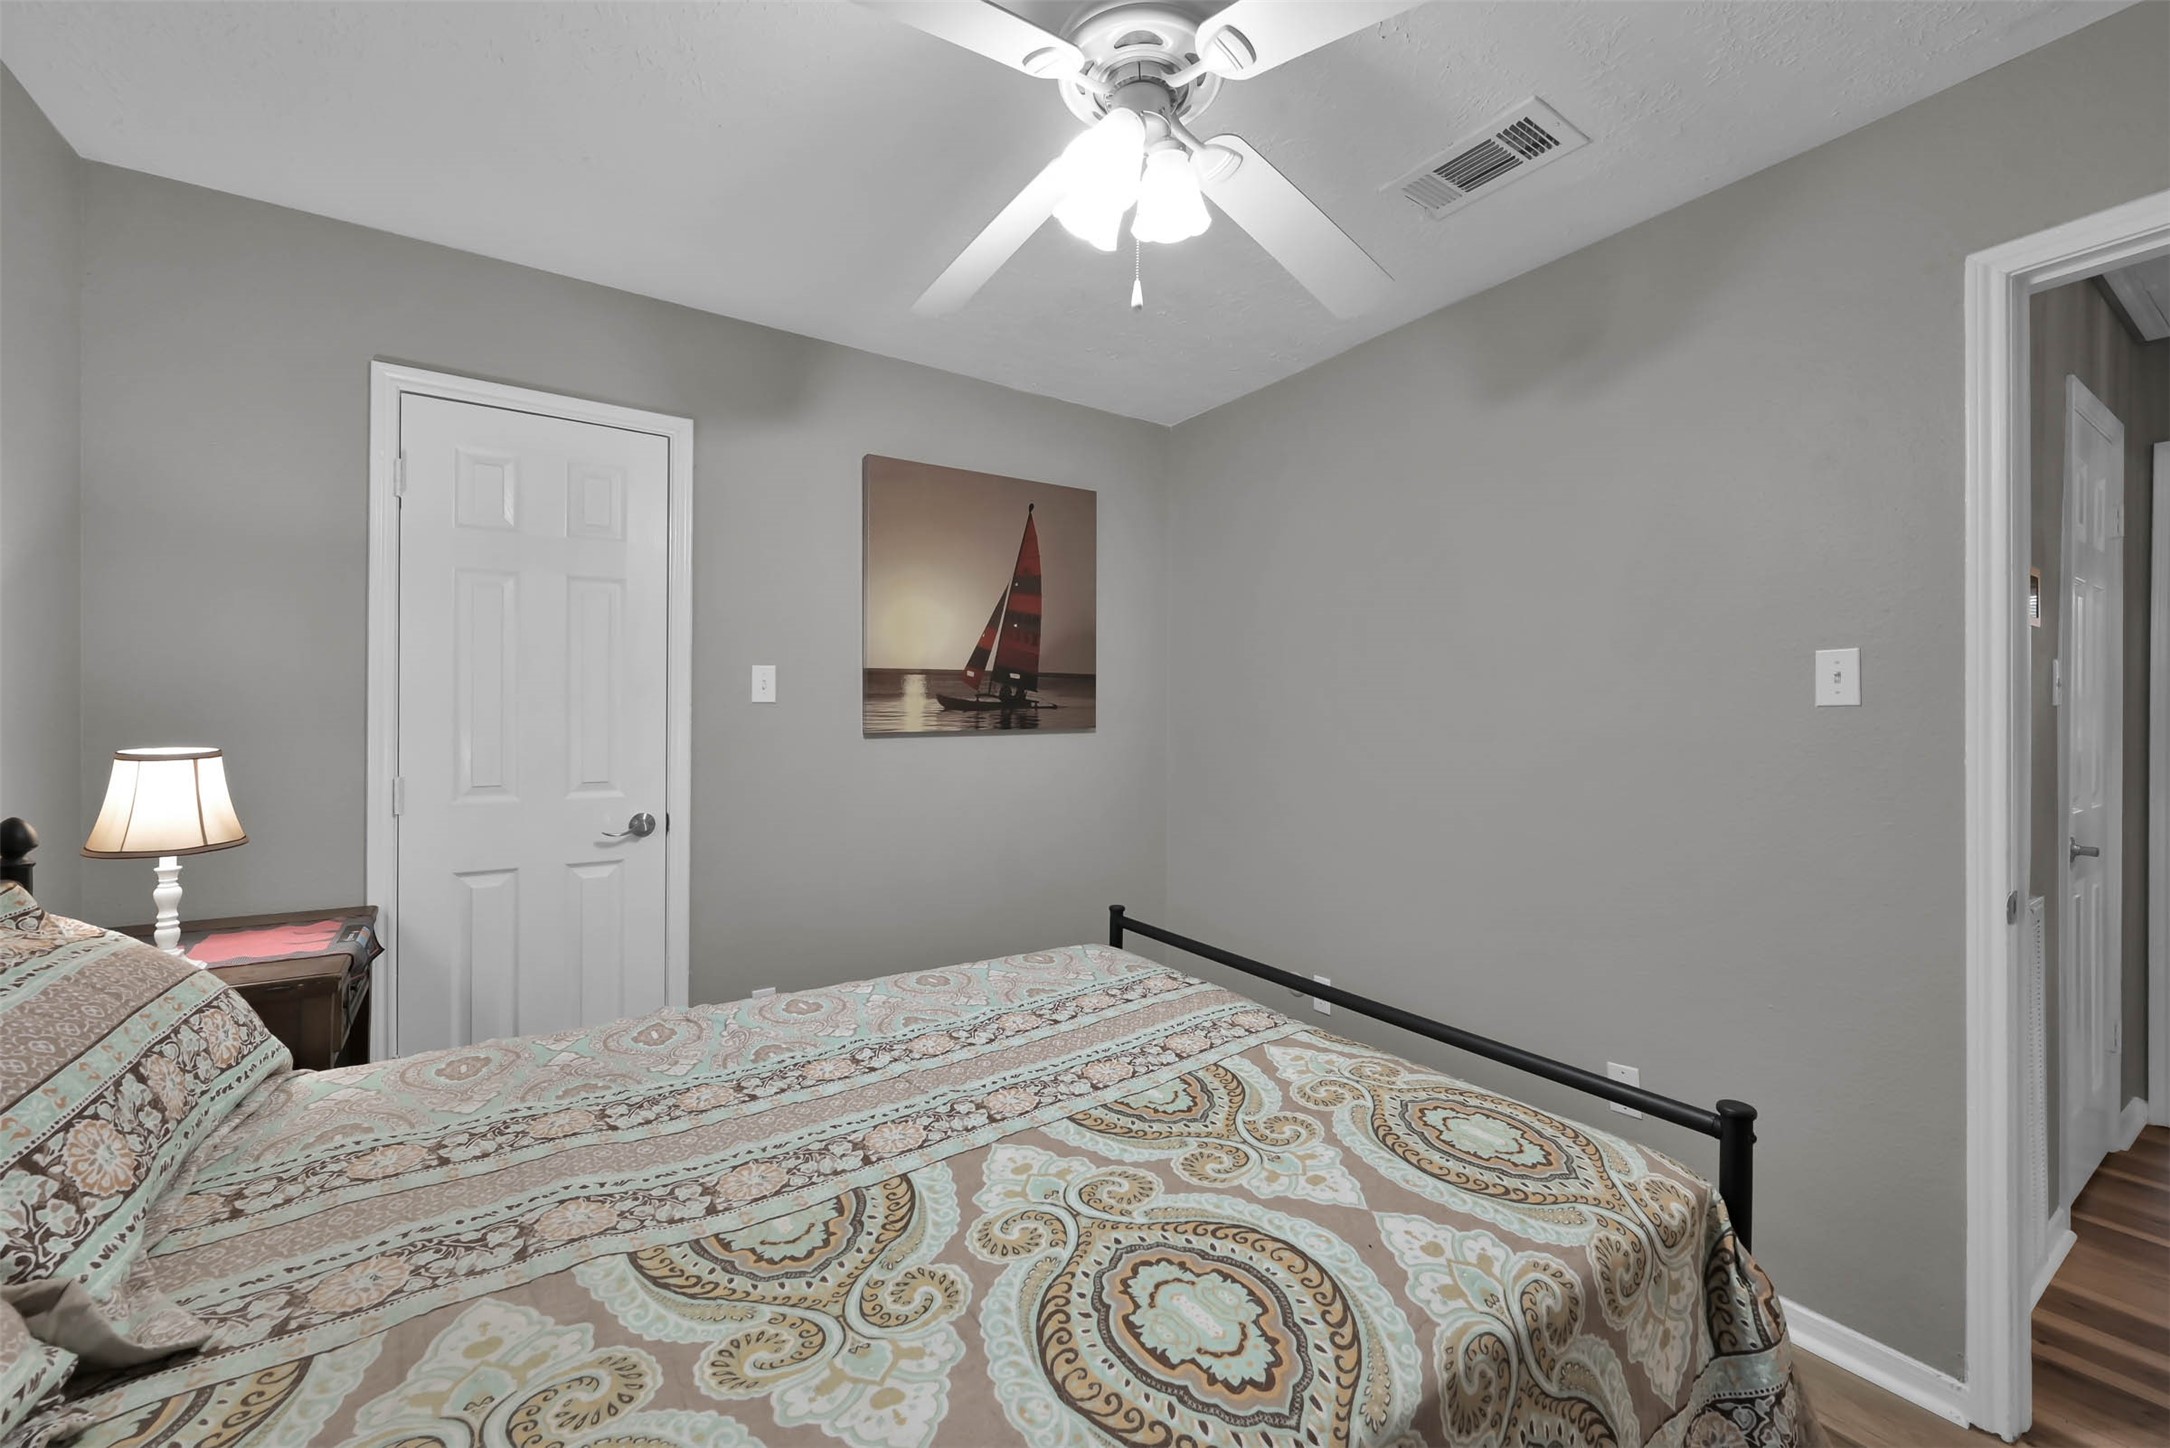 Another view of the space and all bedrooms are a generous size.